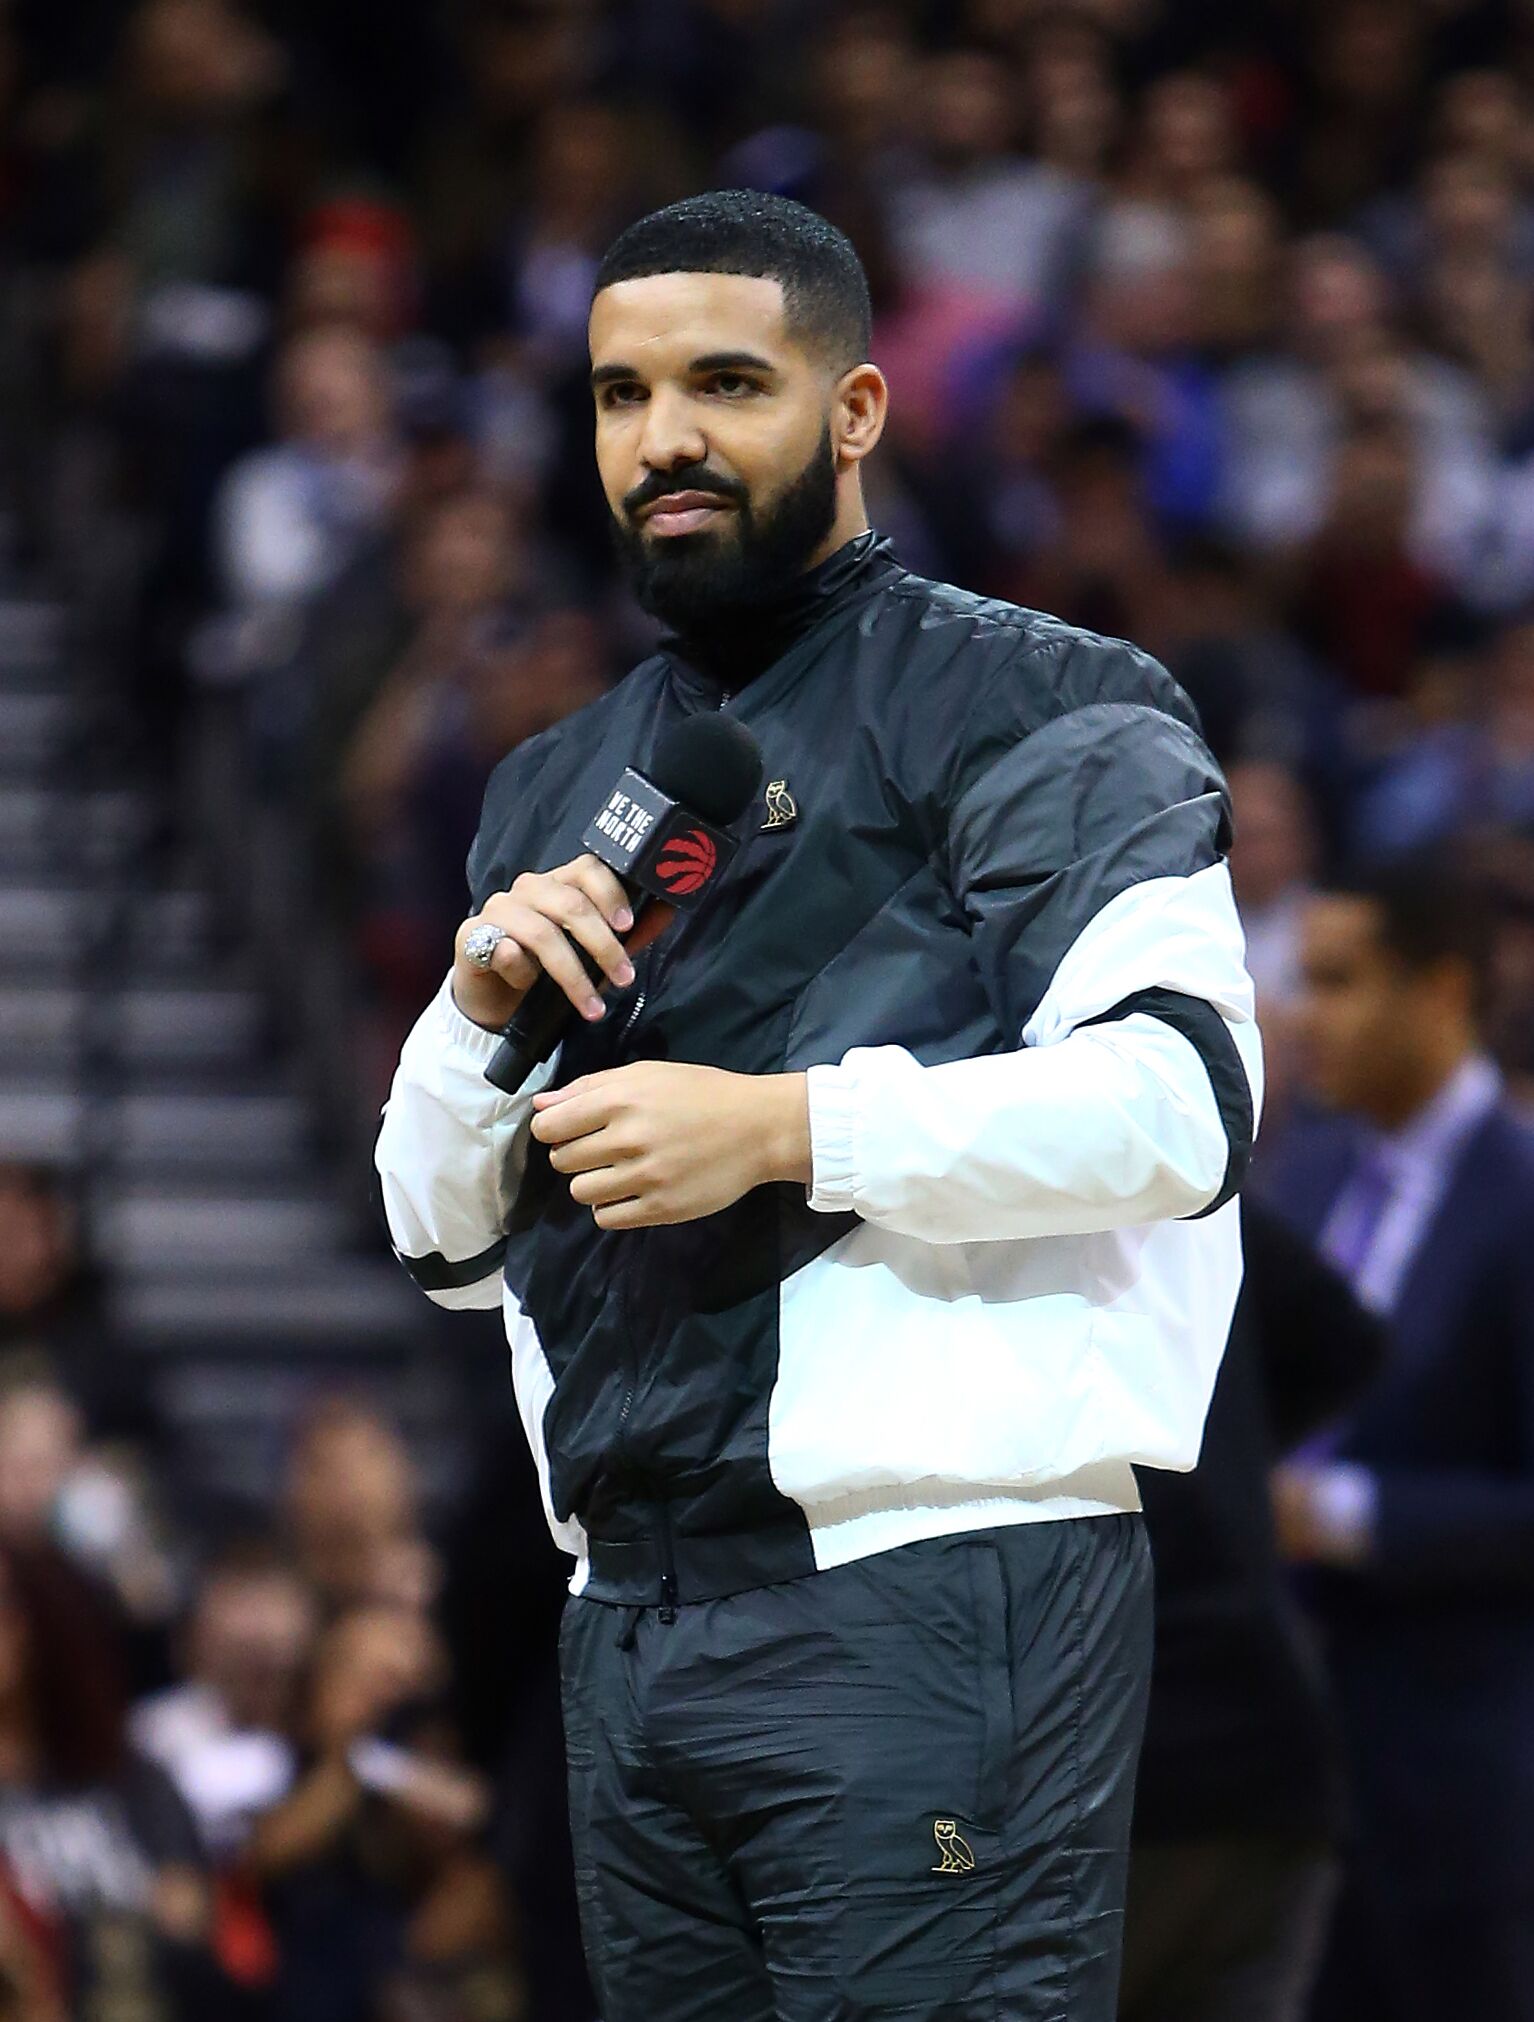  Drake, Toronto Raptors Ambassador, speaks to the crowd on 'Drake Night' during the first half of an NBA game | Getty Images